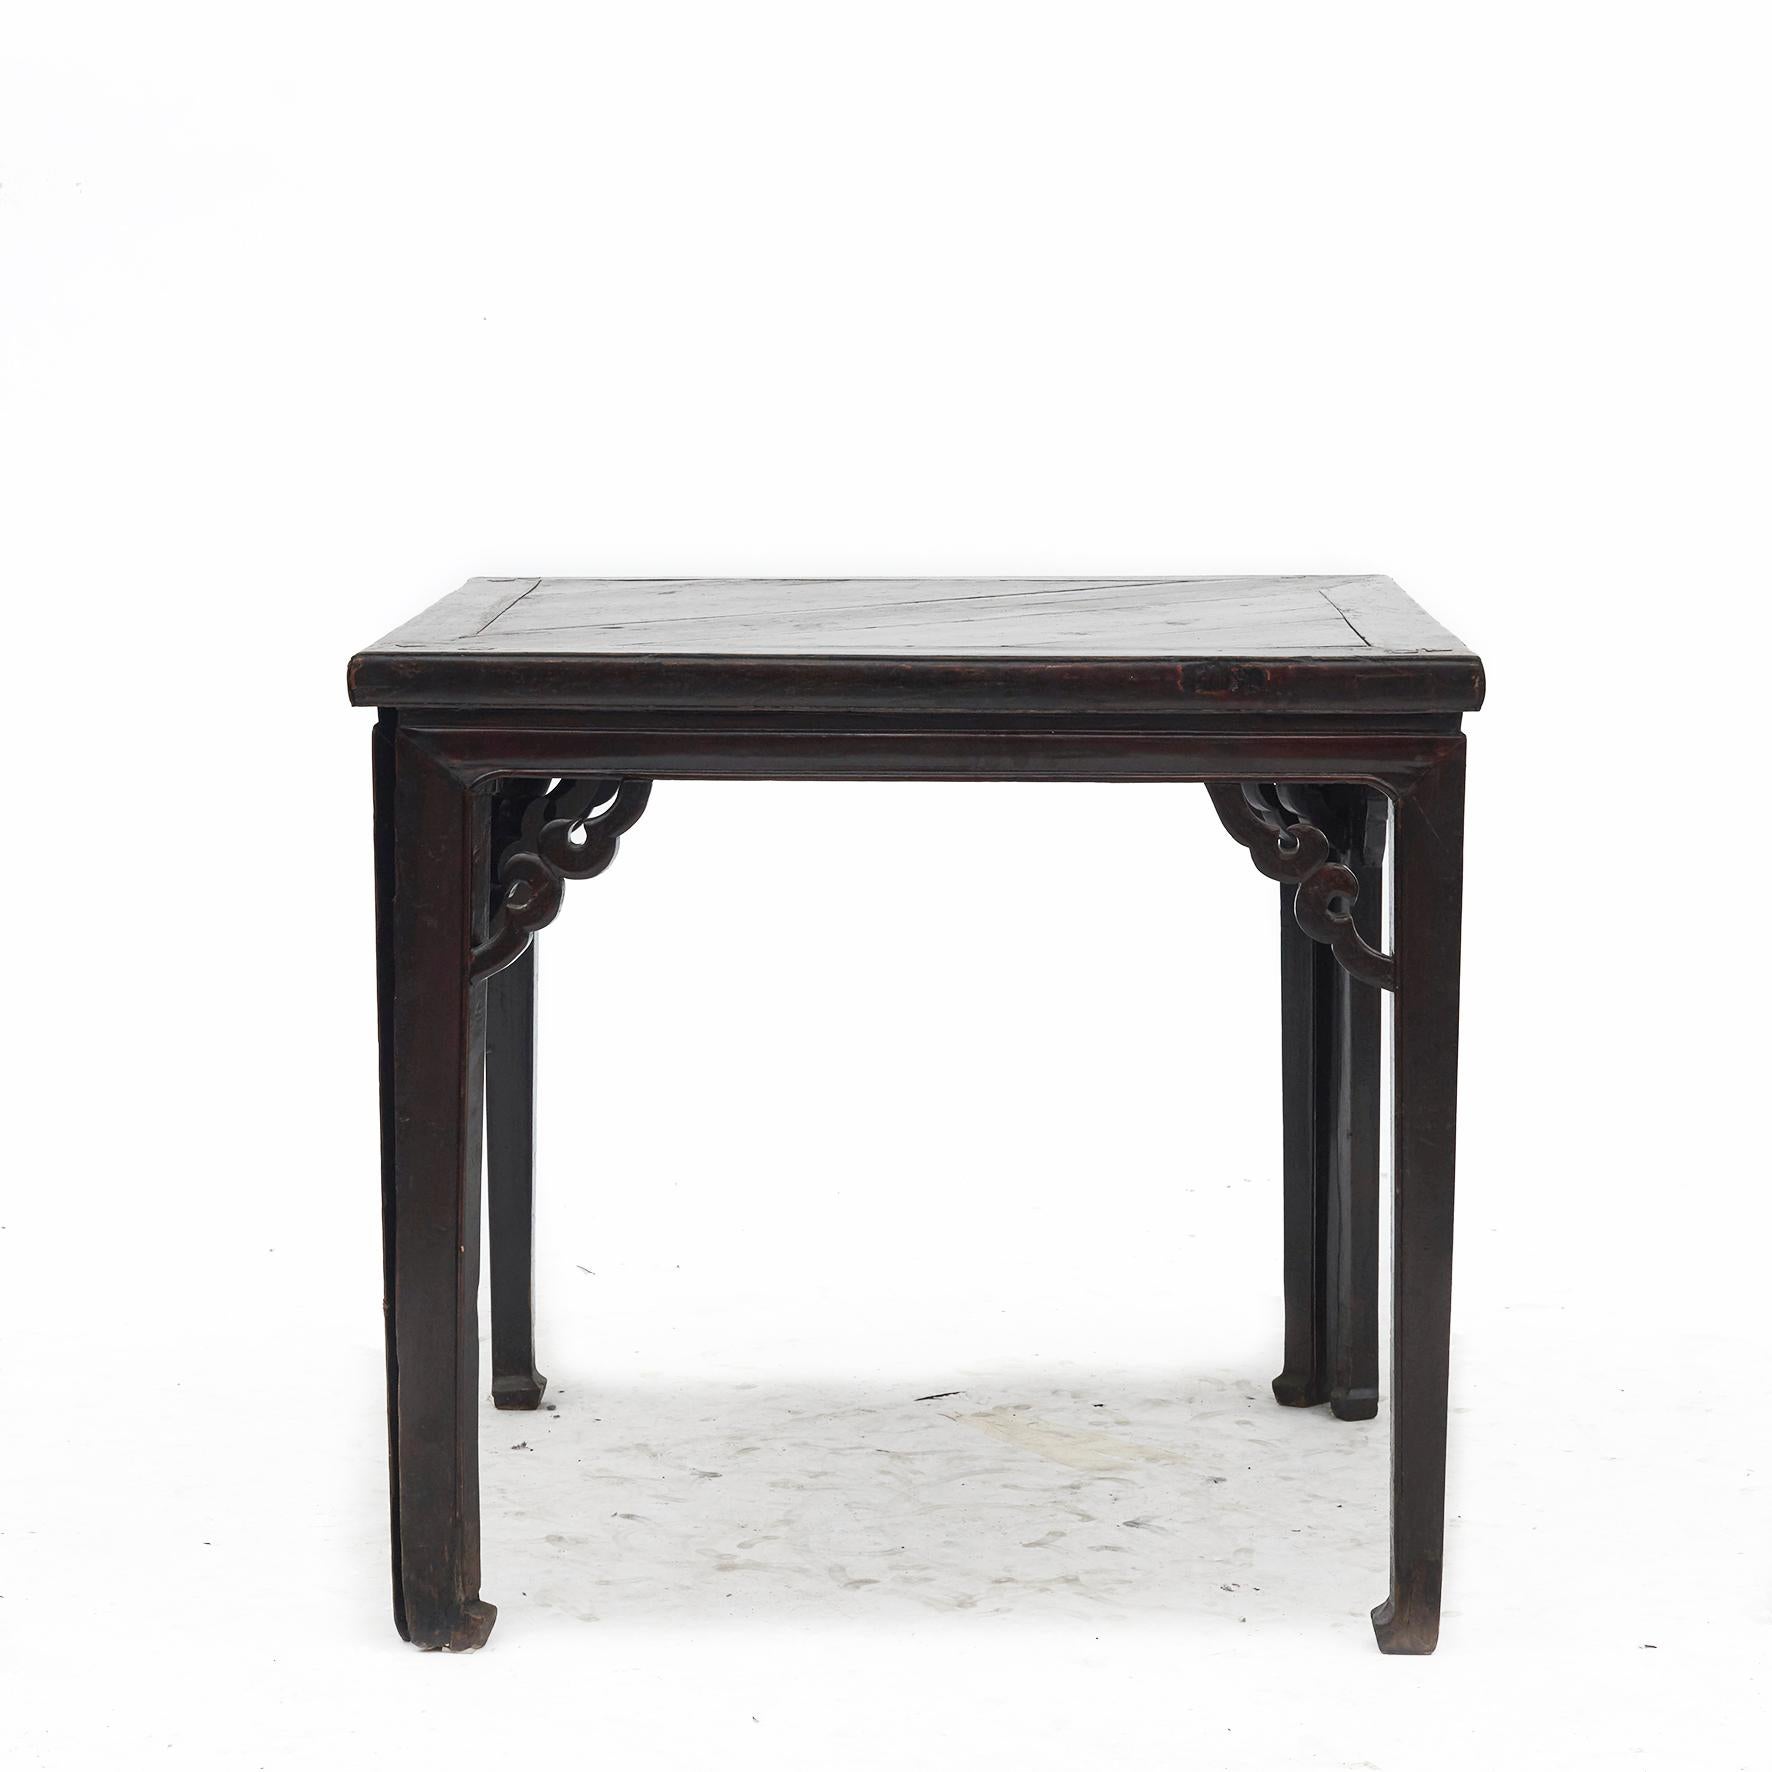 Pair of rare console tables in triangular shape. Original dark burgundy lacquer with natural patina.
Highlighted with a clear lacquer surface finish.

Presumably Shanxi Province. China, 1800 - 1840.

Can be used as: Consoles possibly to corners or